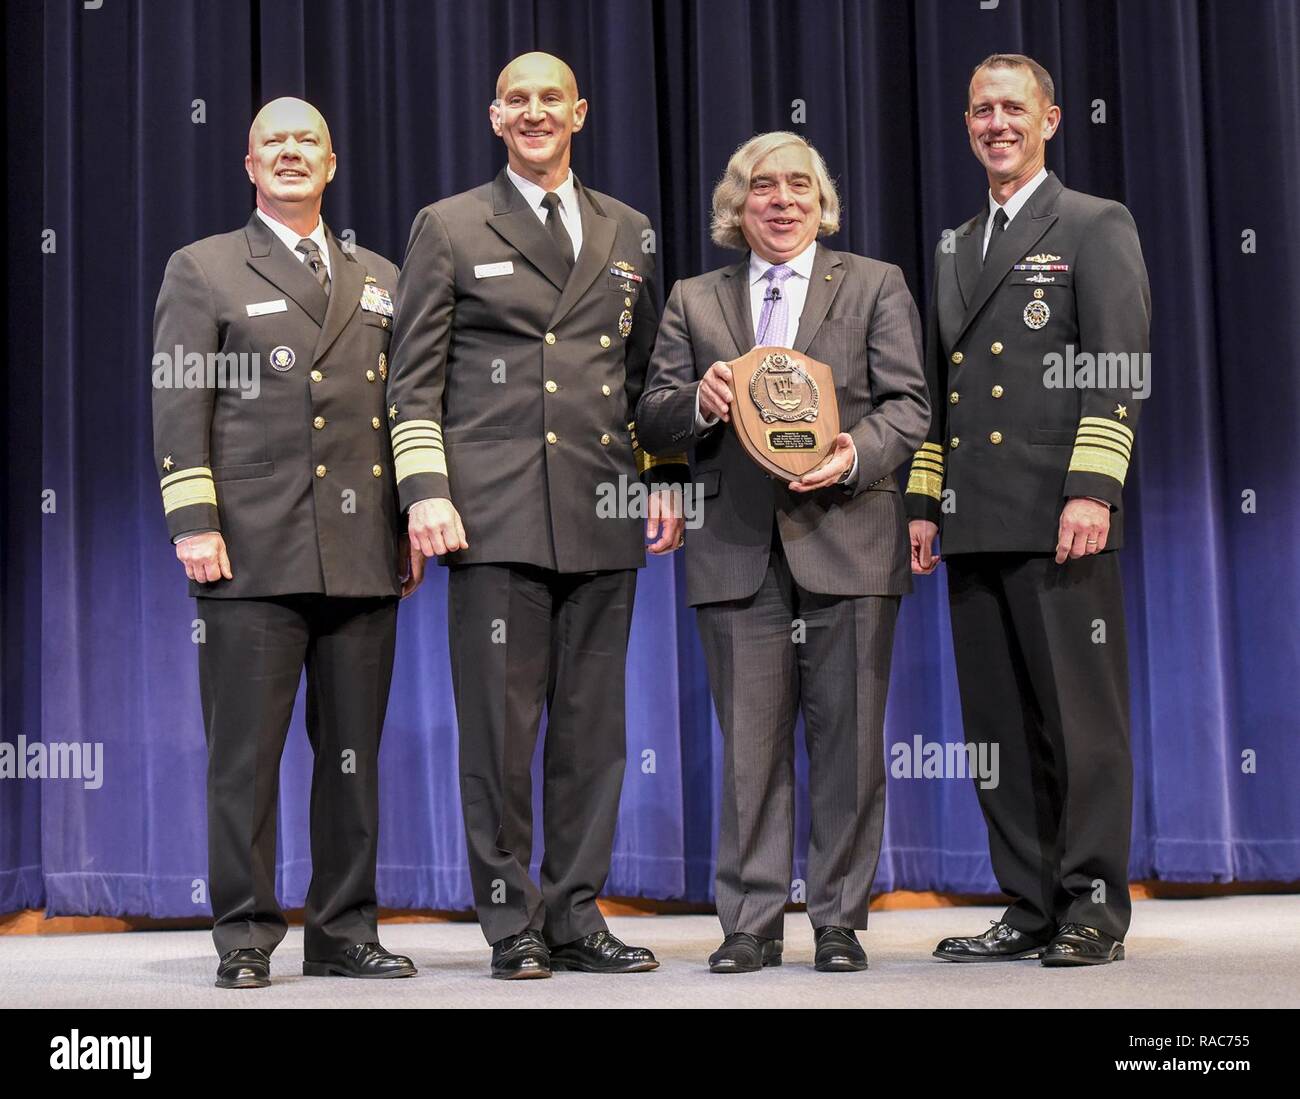 NEWPORT, R.I.  (Jan. 12, 2017)  Rear Adm. Jeffrey A. Harley, president, U.S. Naval War College (NWC), is joined onstage by Adm. James F. Caldwell Jr., director, naval nuclear propulsion program, Ernest Moniz, U.S. secretary of energy, and Adm. John M. Richardson, chief of naval operations, to present a commemorative plaque to Moniz as recognition for his visit to NWC. During his talk on nuclear security and strategy, Moniz highlighted the importance of science-based stockpile stewardship and the challenges ahead for nonproliferation and nuclear weapons policy. Stock Photo